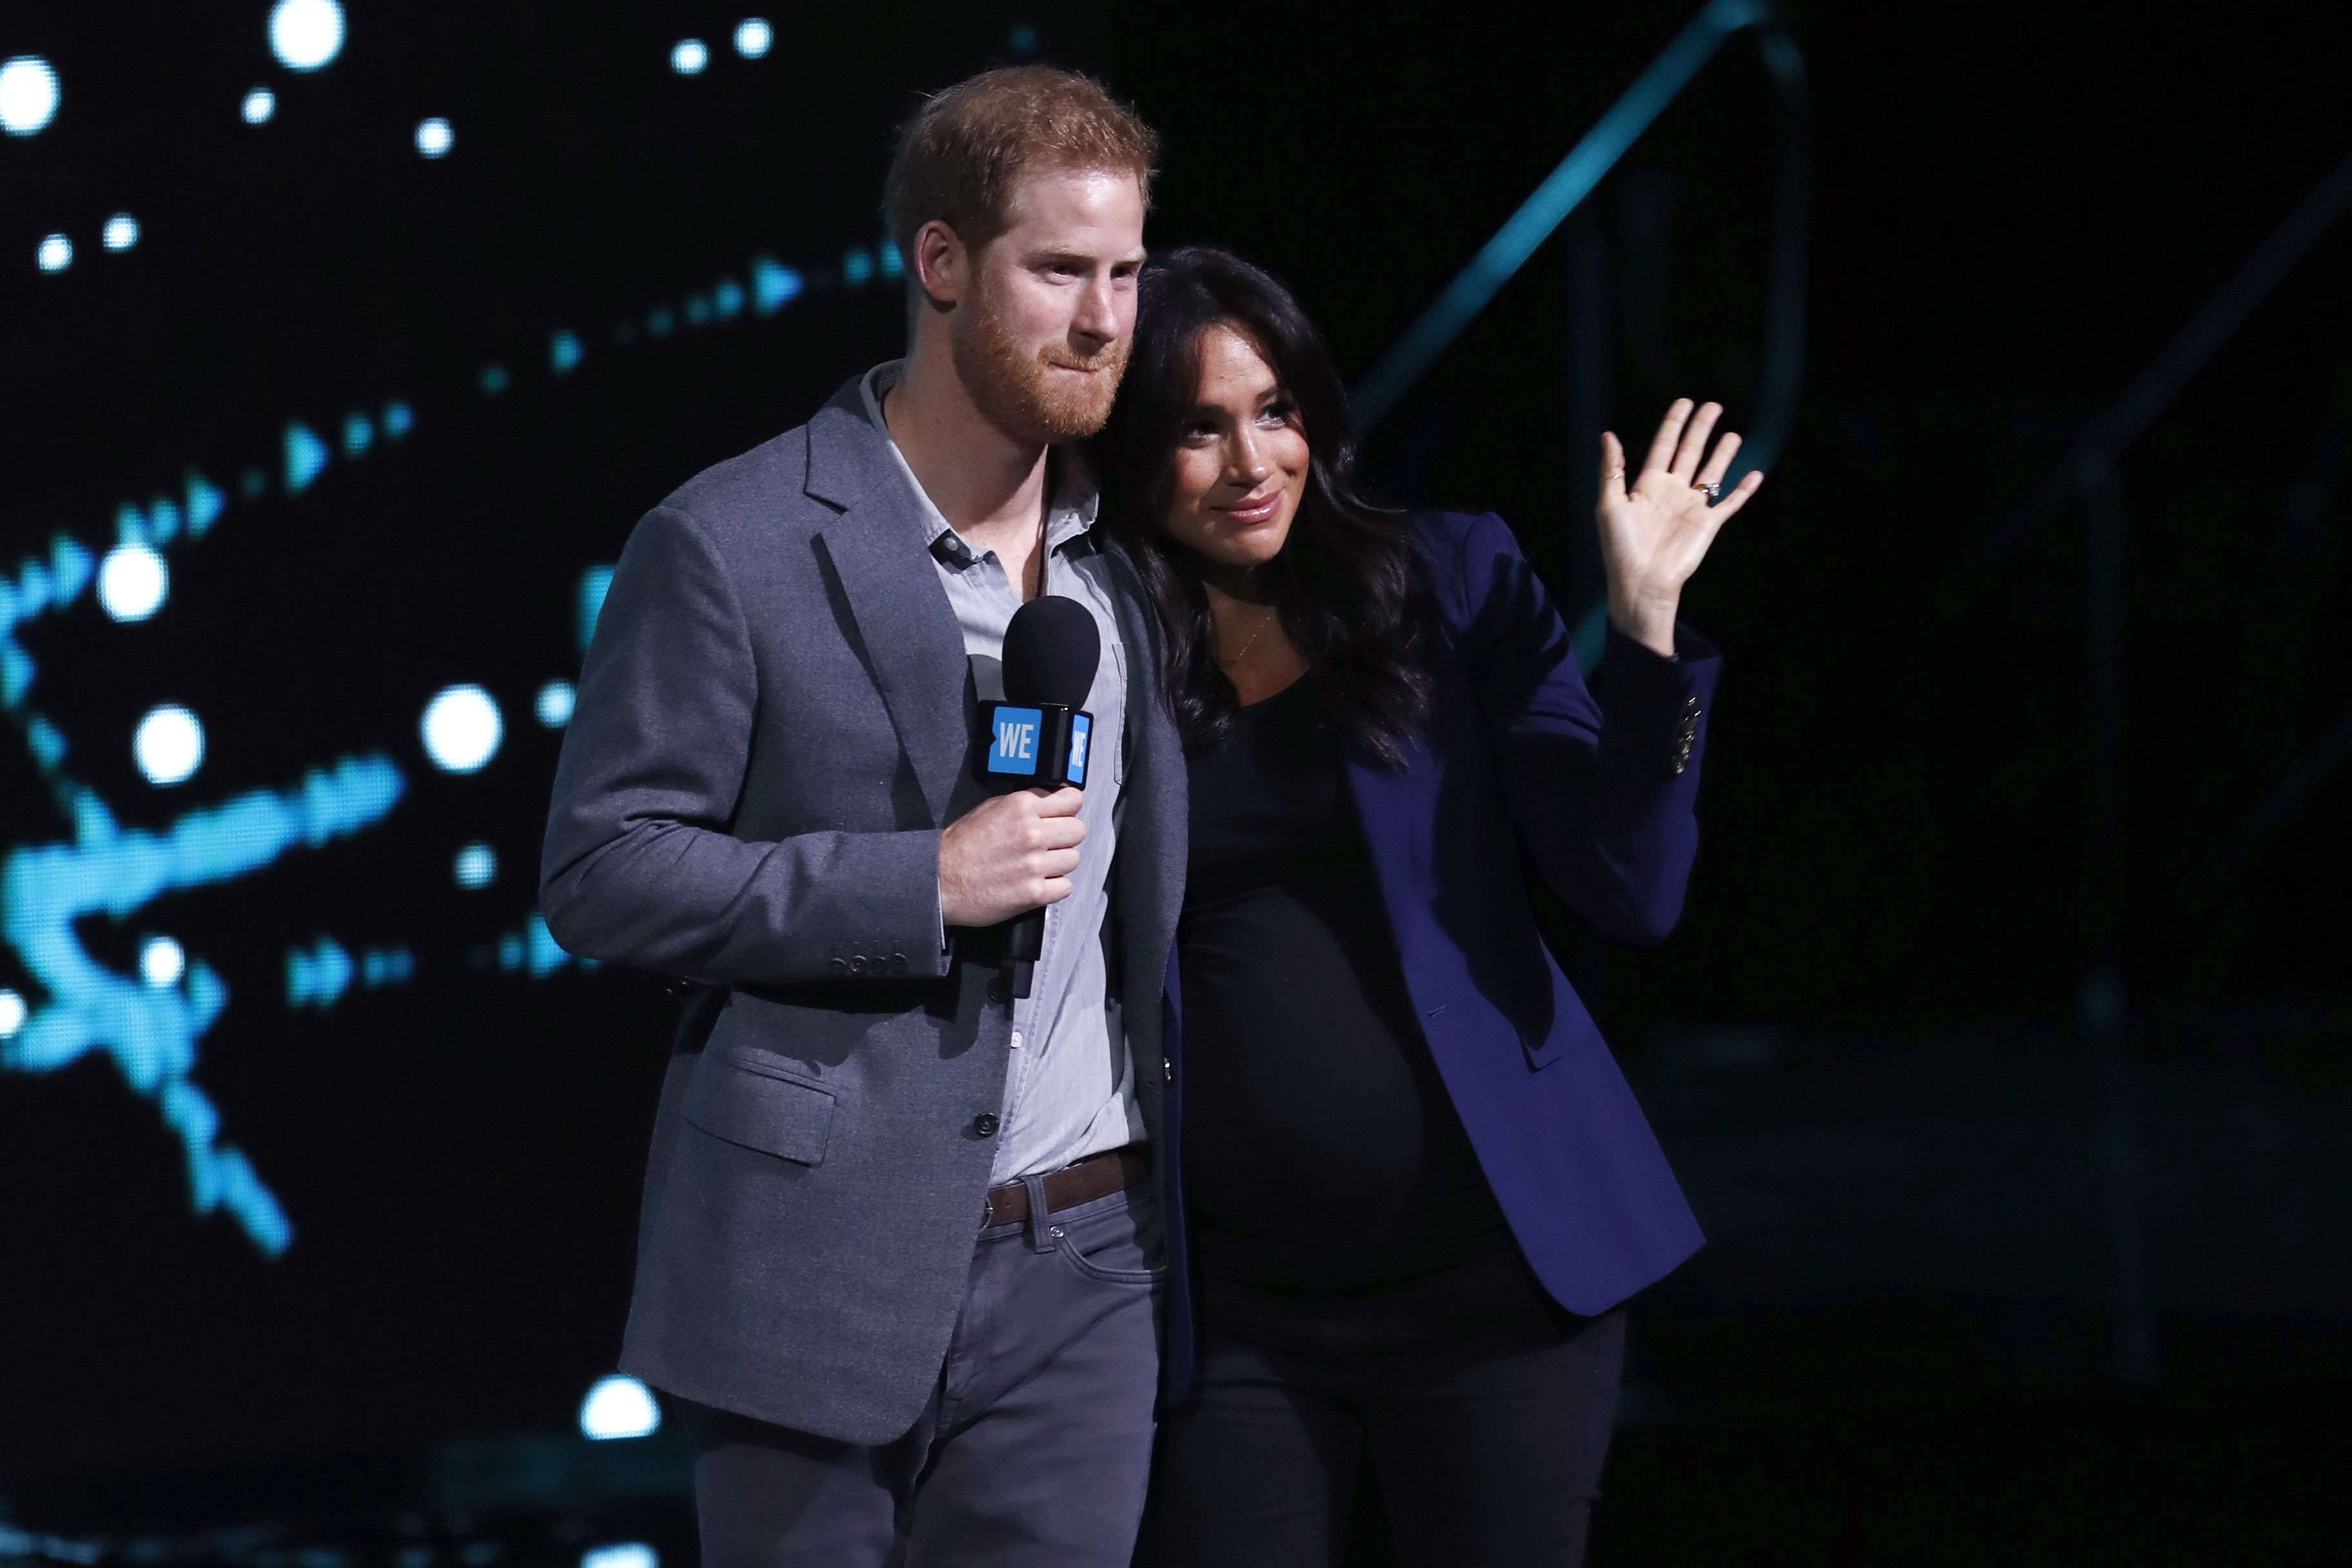 Prince Harry and Duchess Meghan Confirm They Will Not Return to Their Royal Roles